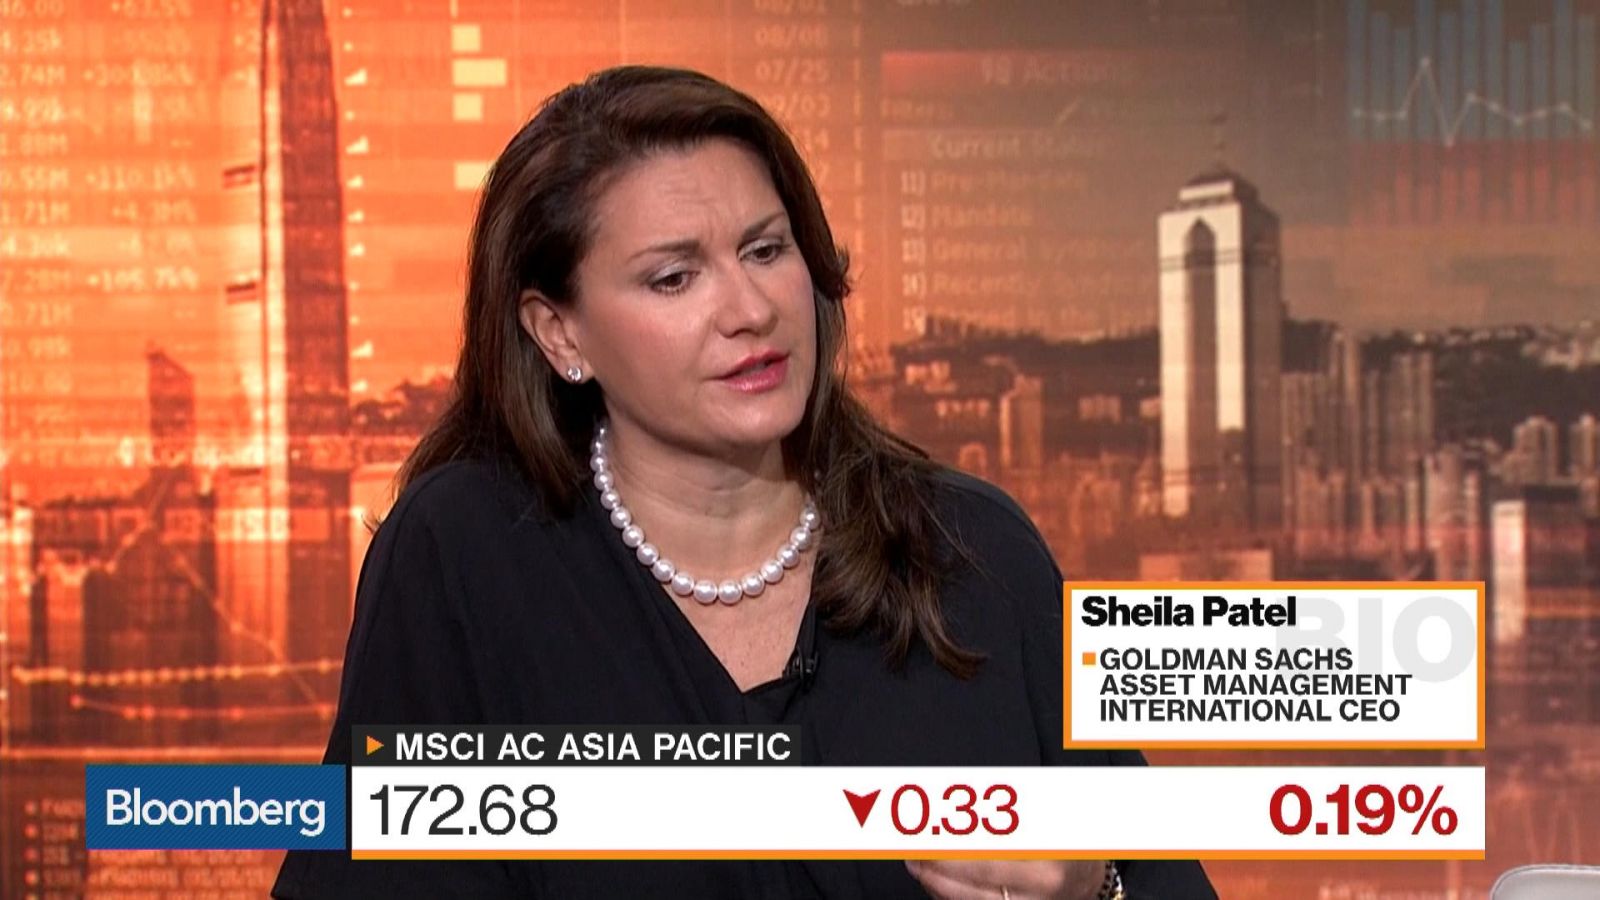 Sheila Patel during an interview with Bloomberg